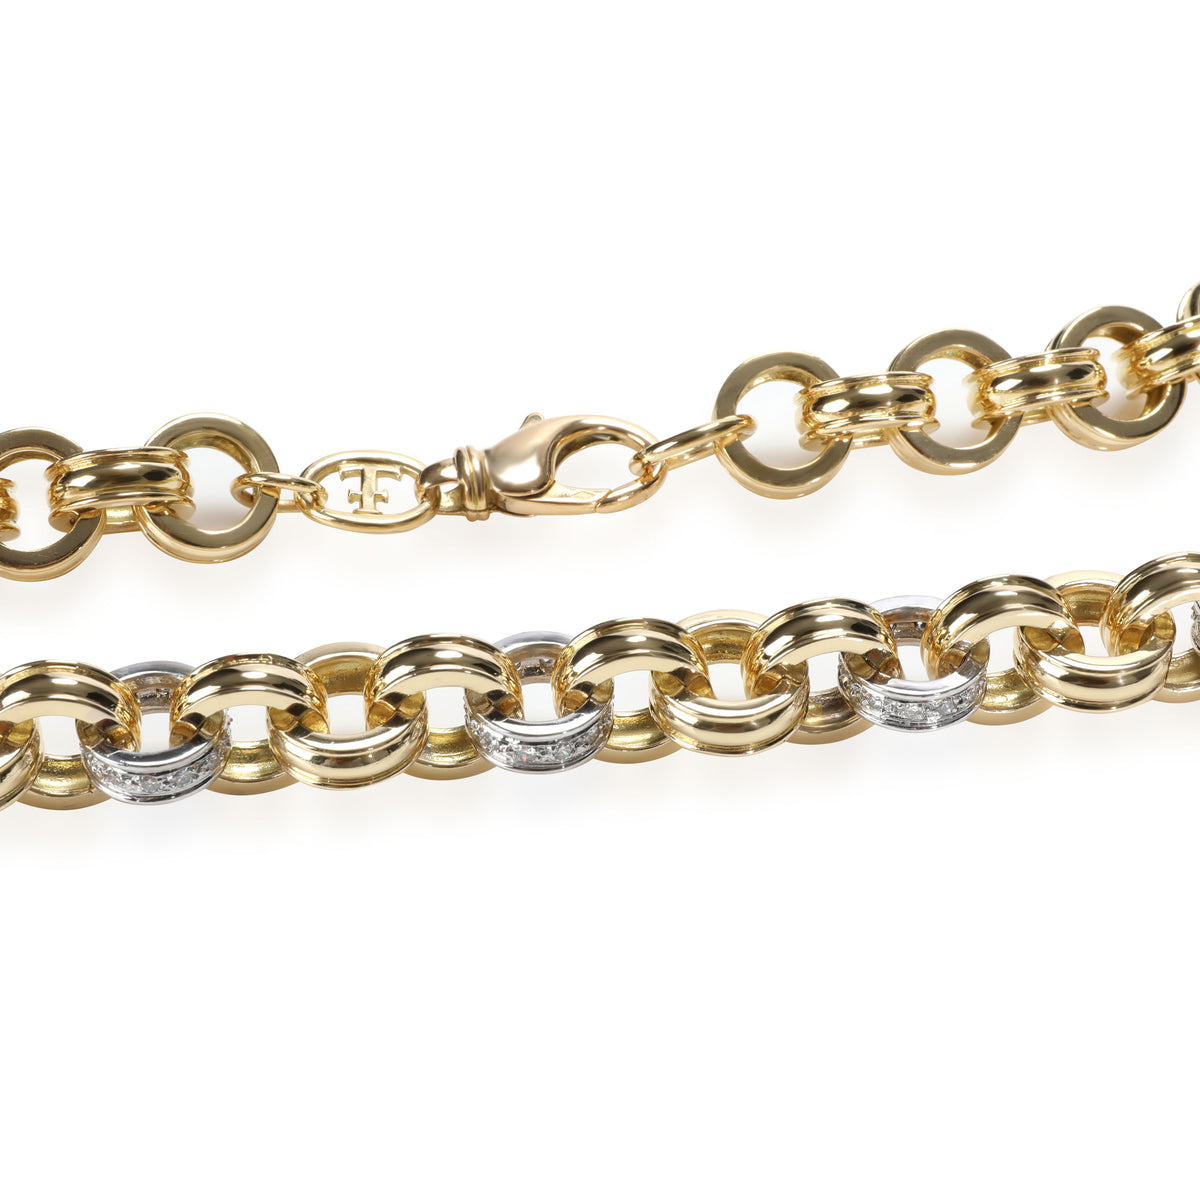 Theo Fennell Diamond Link Necklace in 18K 2 Tone Gold 2.52 CTW